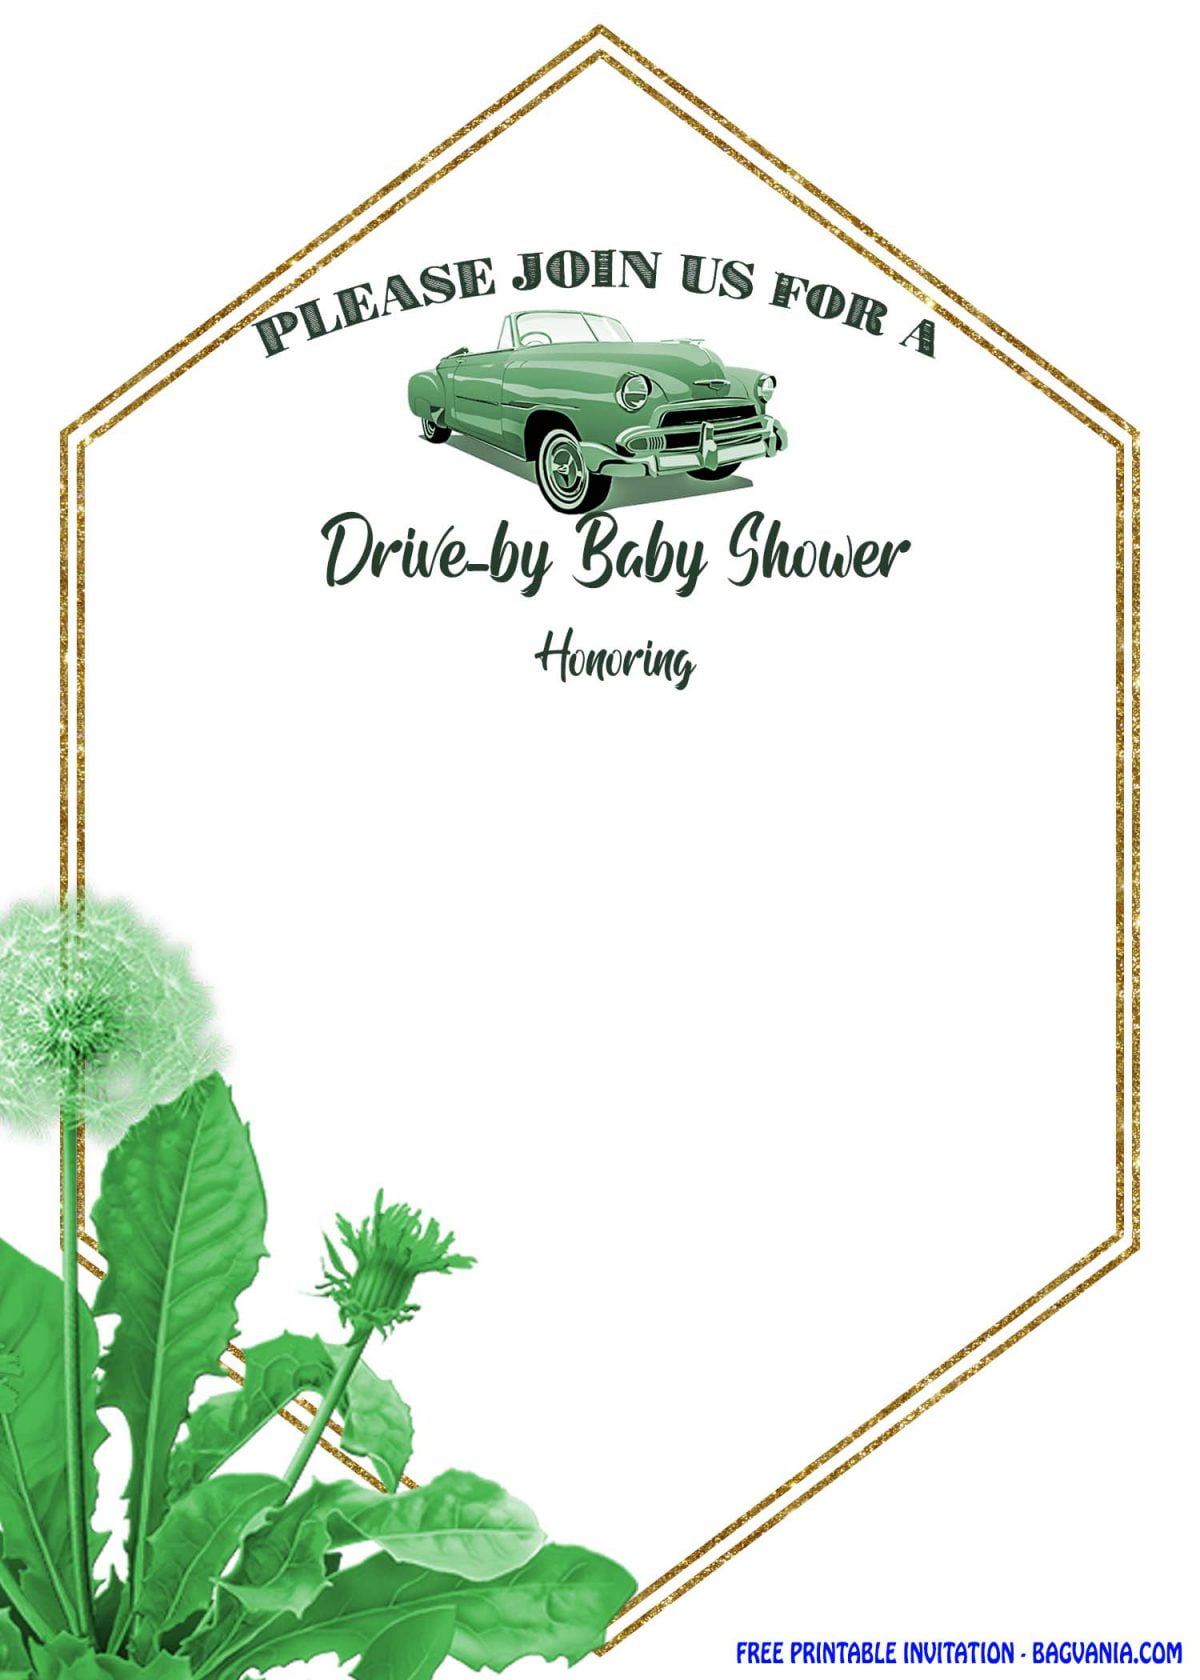 Free Printable Greenery Hexagonal Drive By Invitation Templates With Gold Text Frame